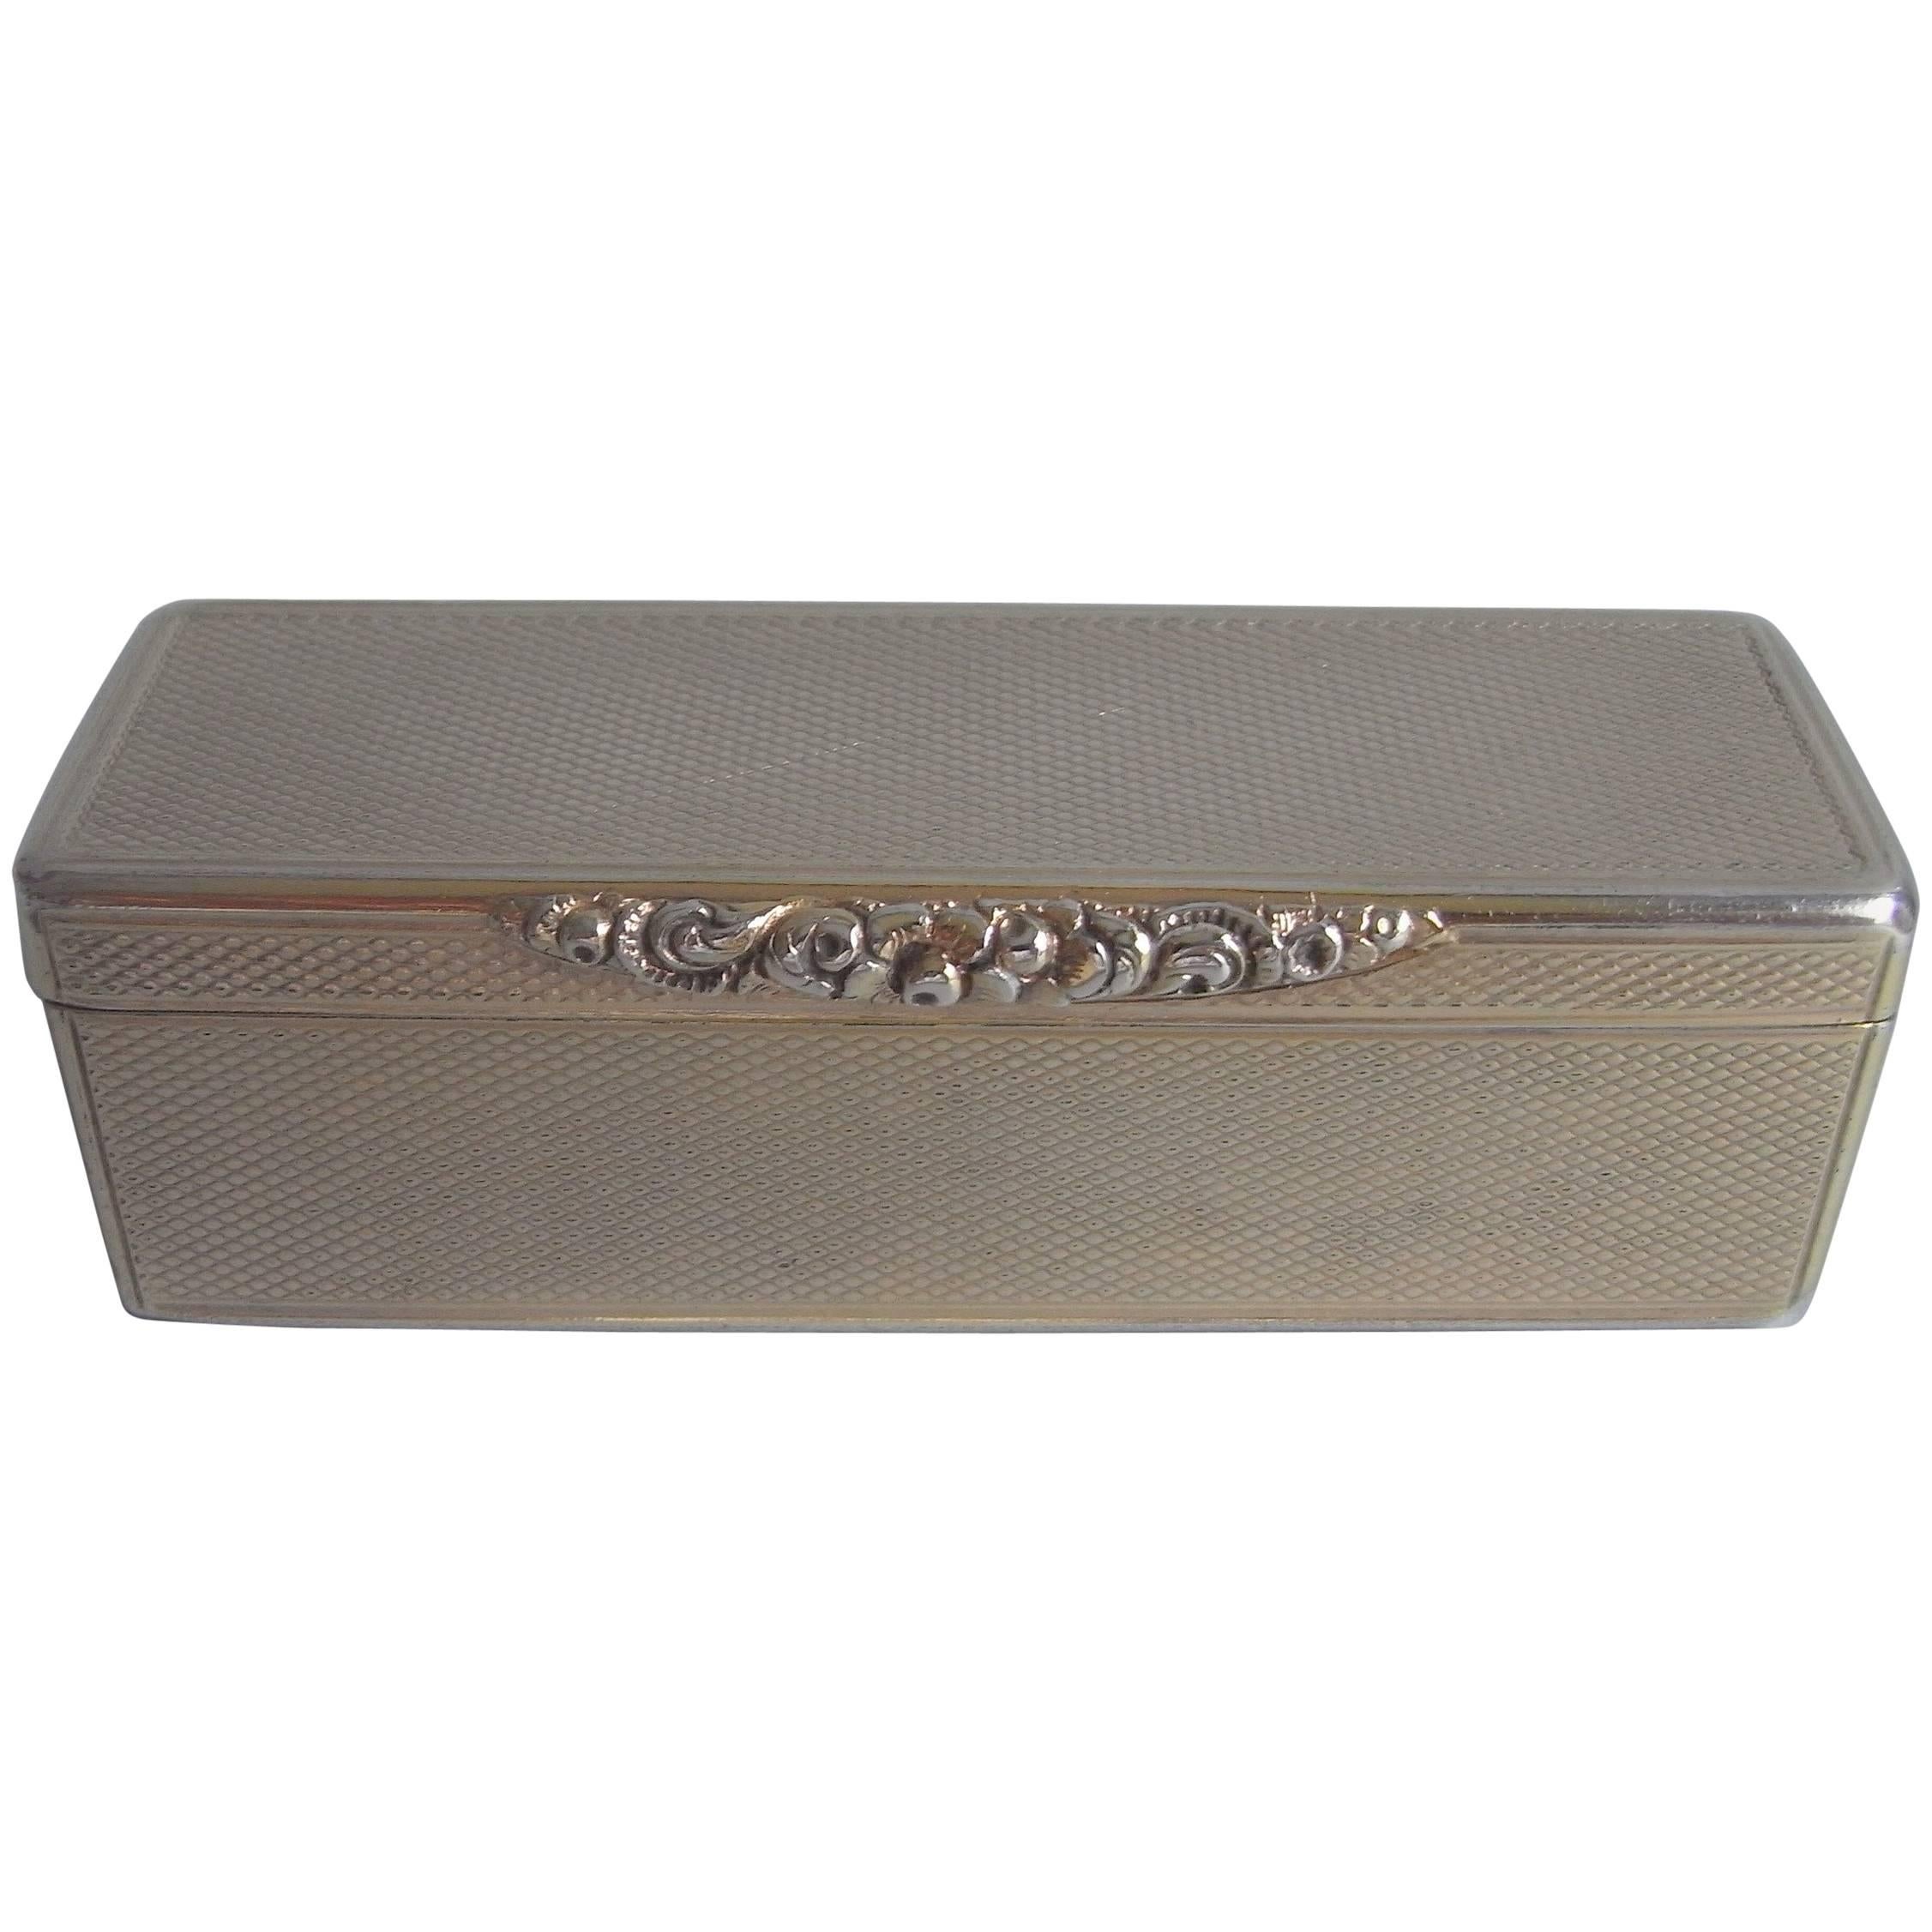 Extremely Fine George IV Silver Gilt Snuff Box Made by Charles Rawlings